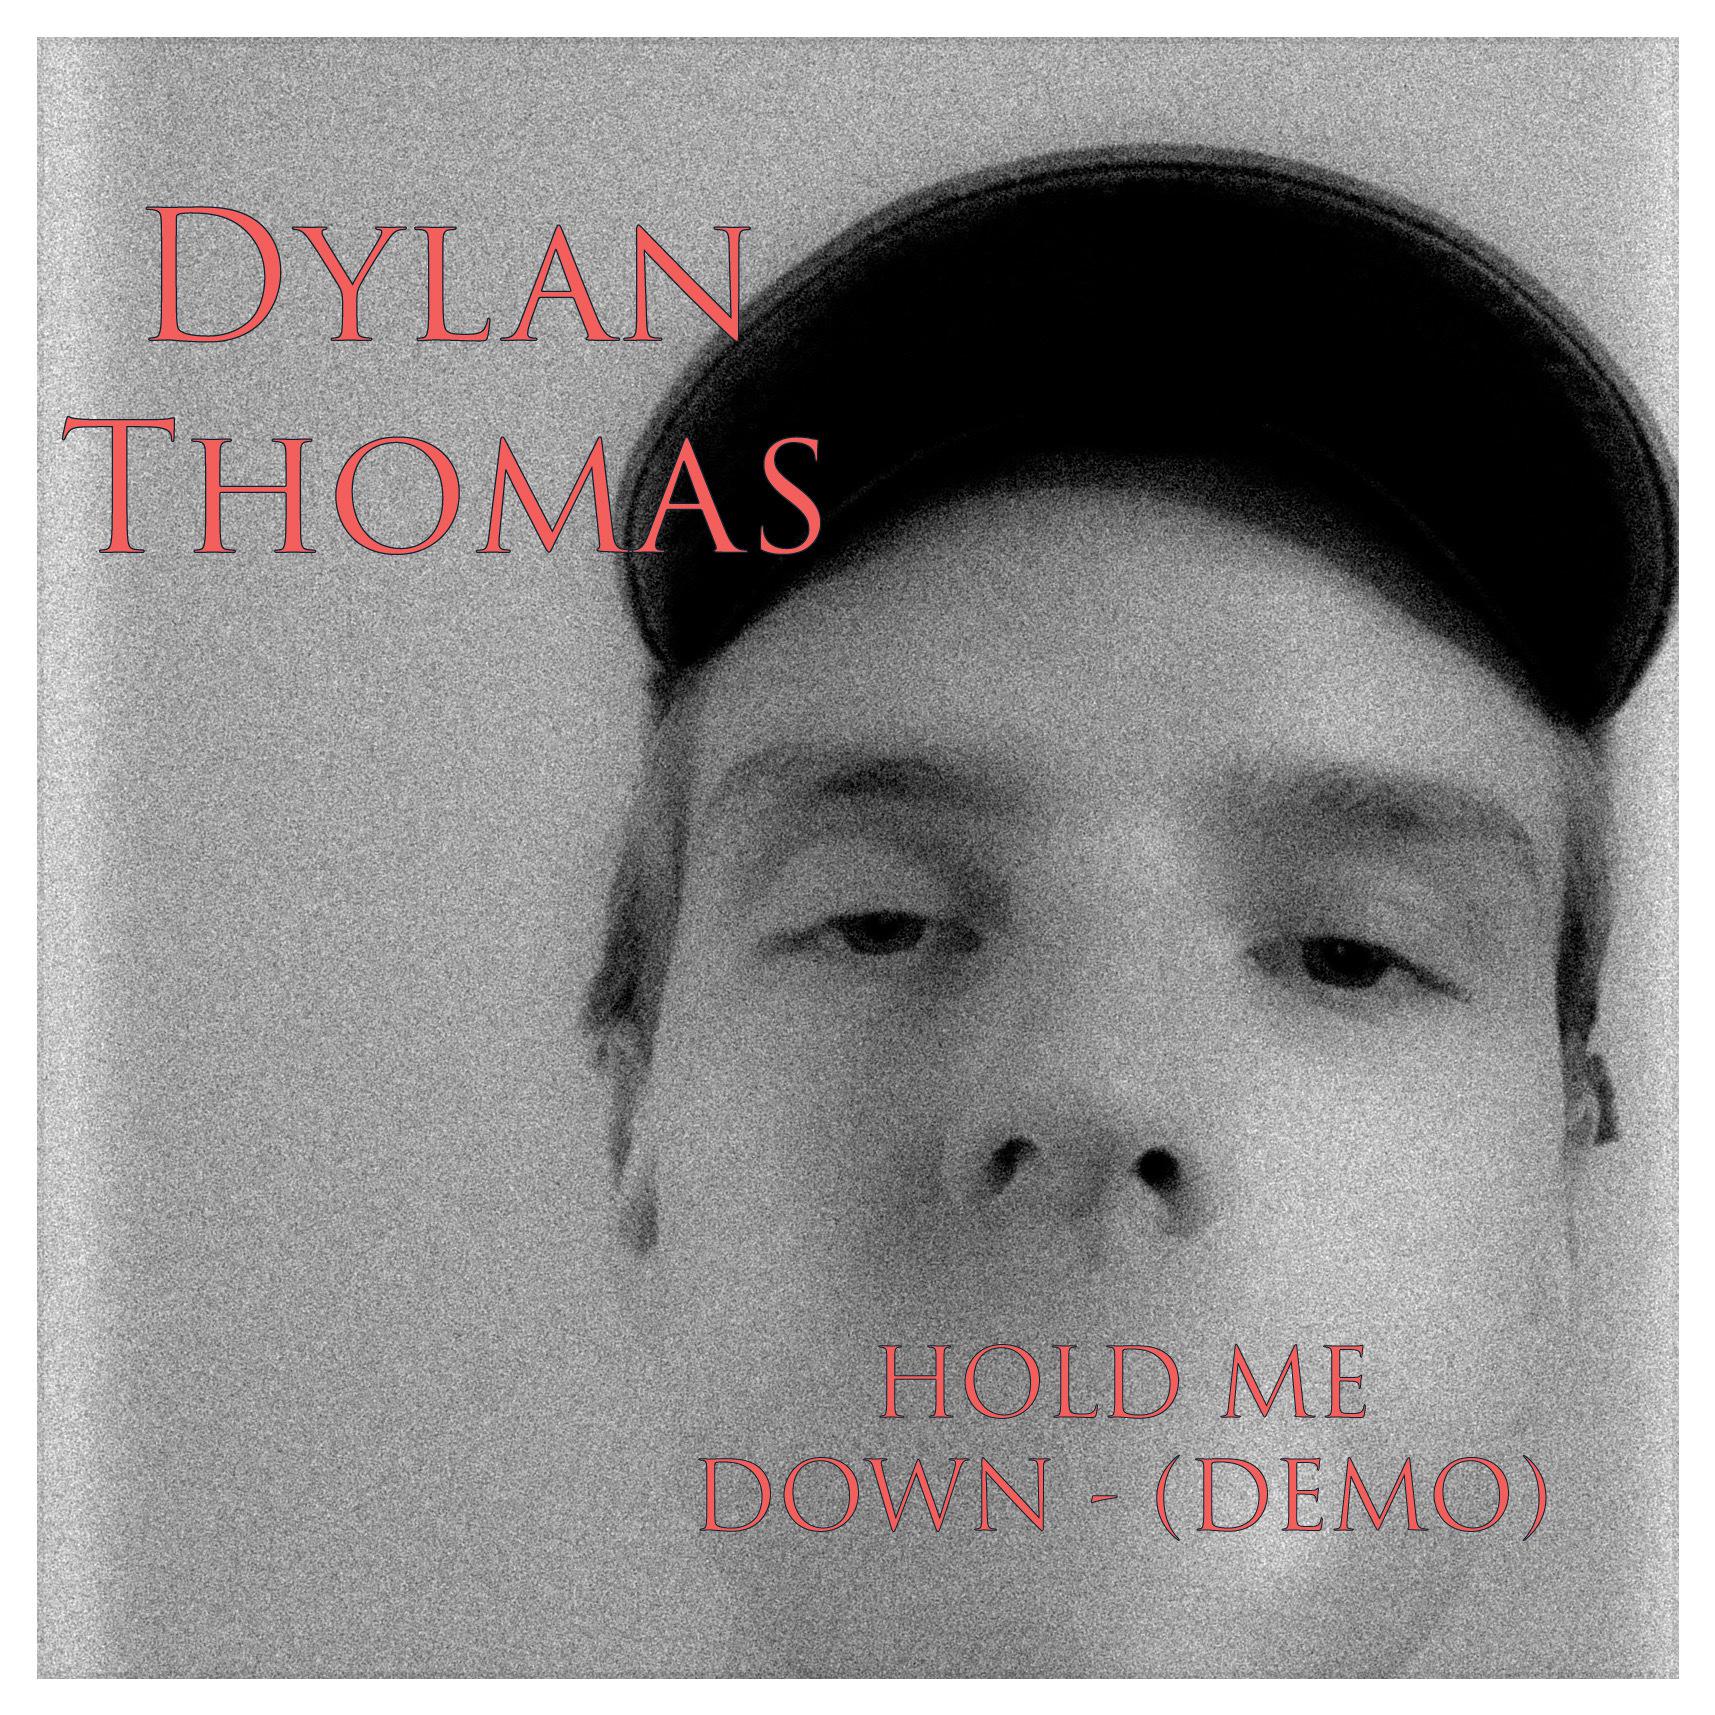 Dylan Thomas - Hold Me Down - (Demo)